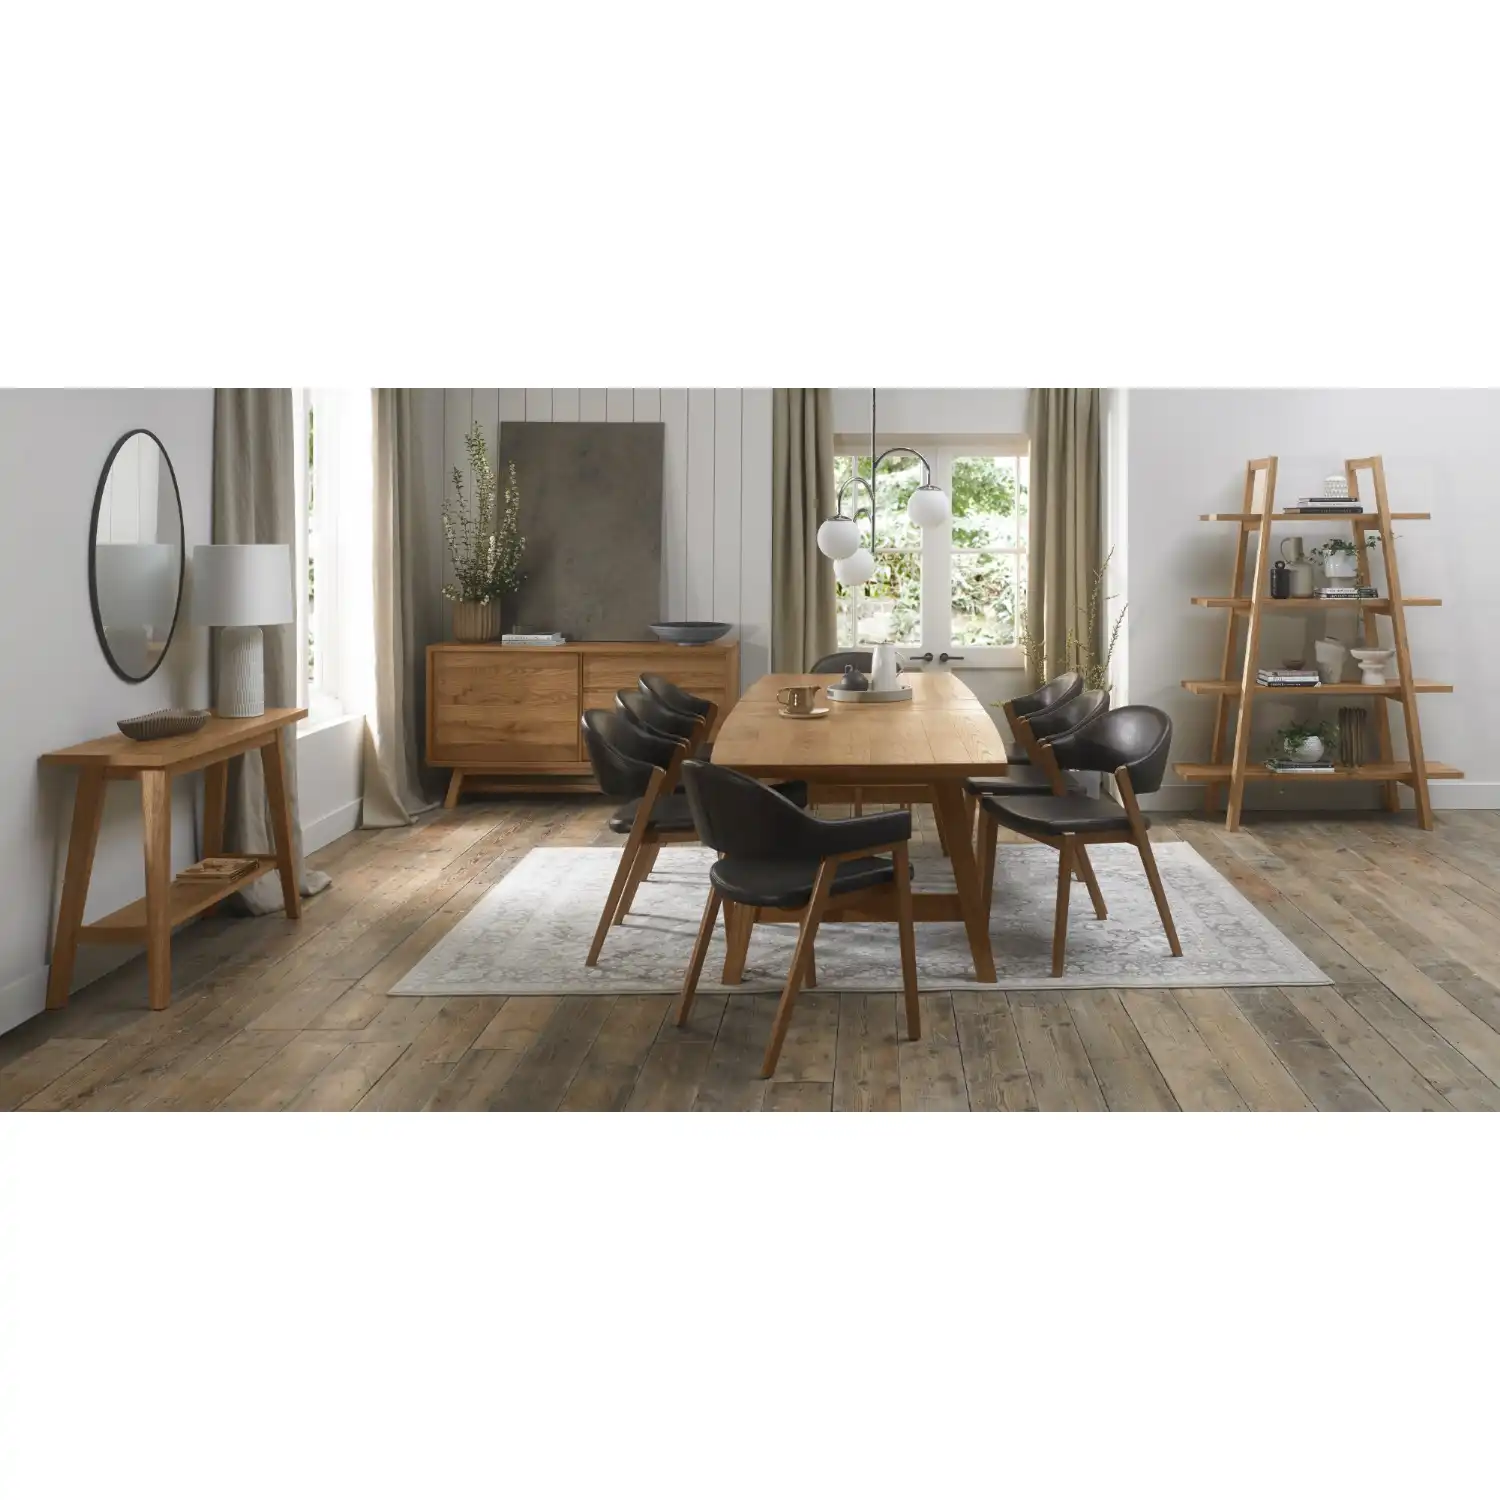 Rustic Oak Dining Table Set 6 Side Chairs 2 Arm Chairs